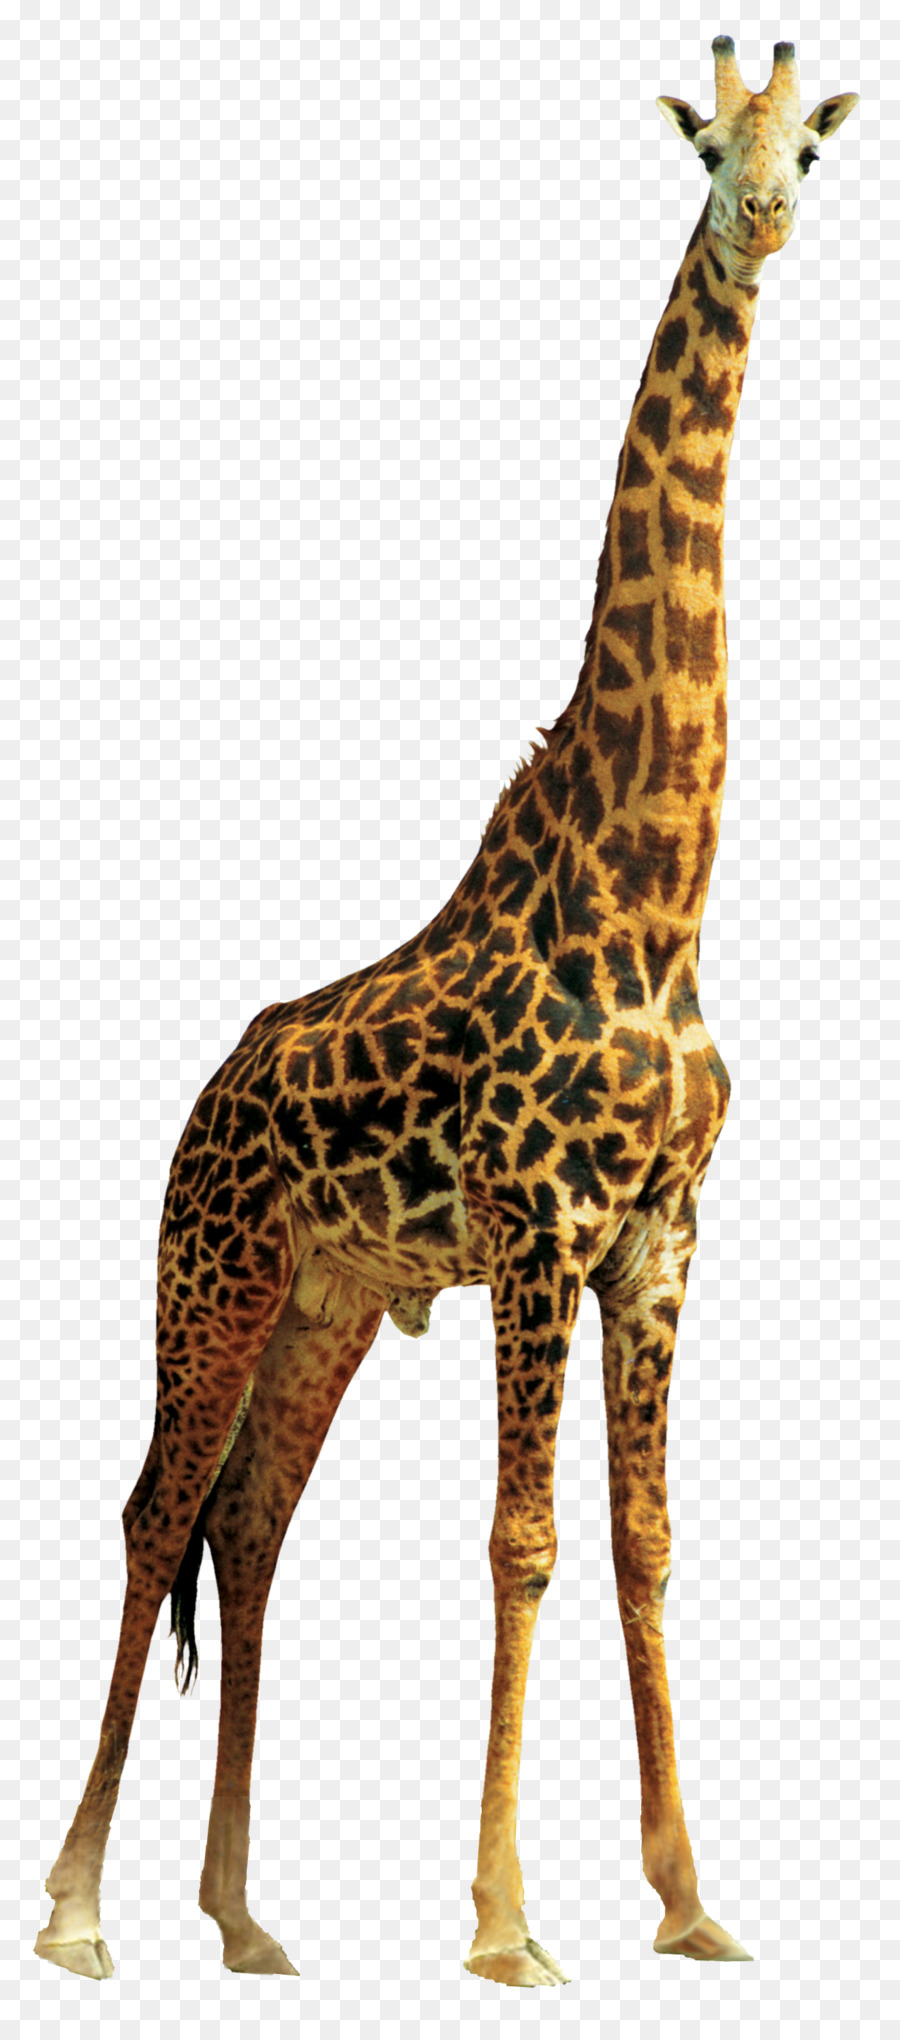 Northern giraffe Transparency and translucency Animal - giraffe png download - 1321*2970 - Free Transparent Northern Giraffe png Download.